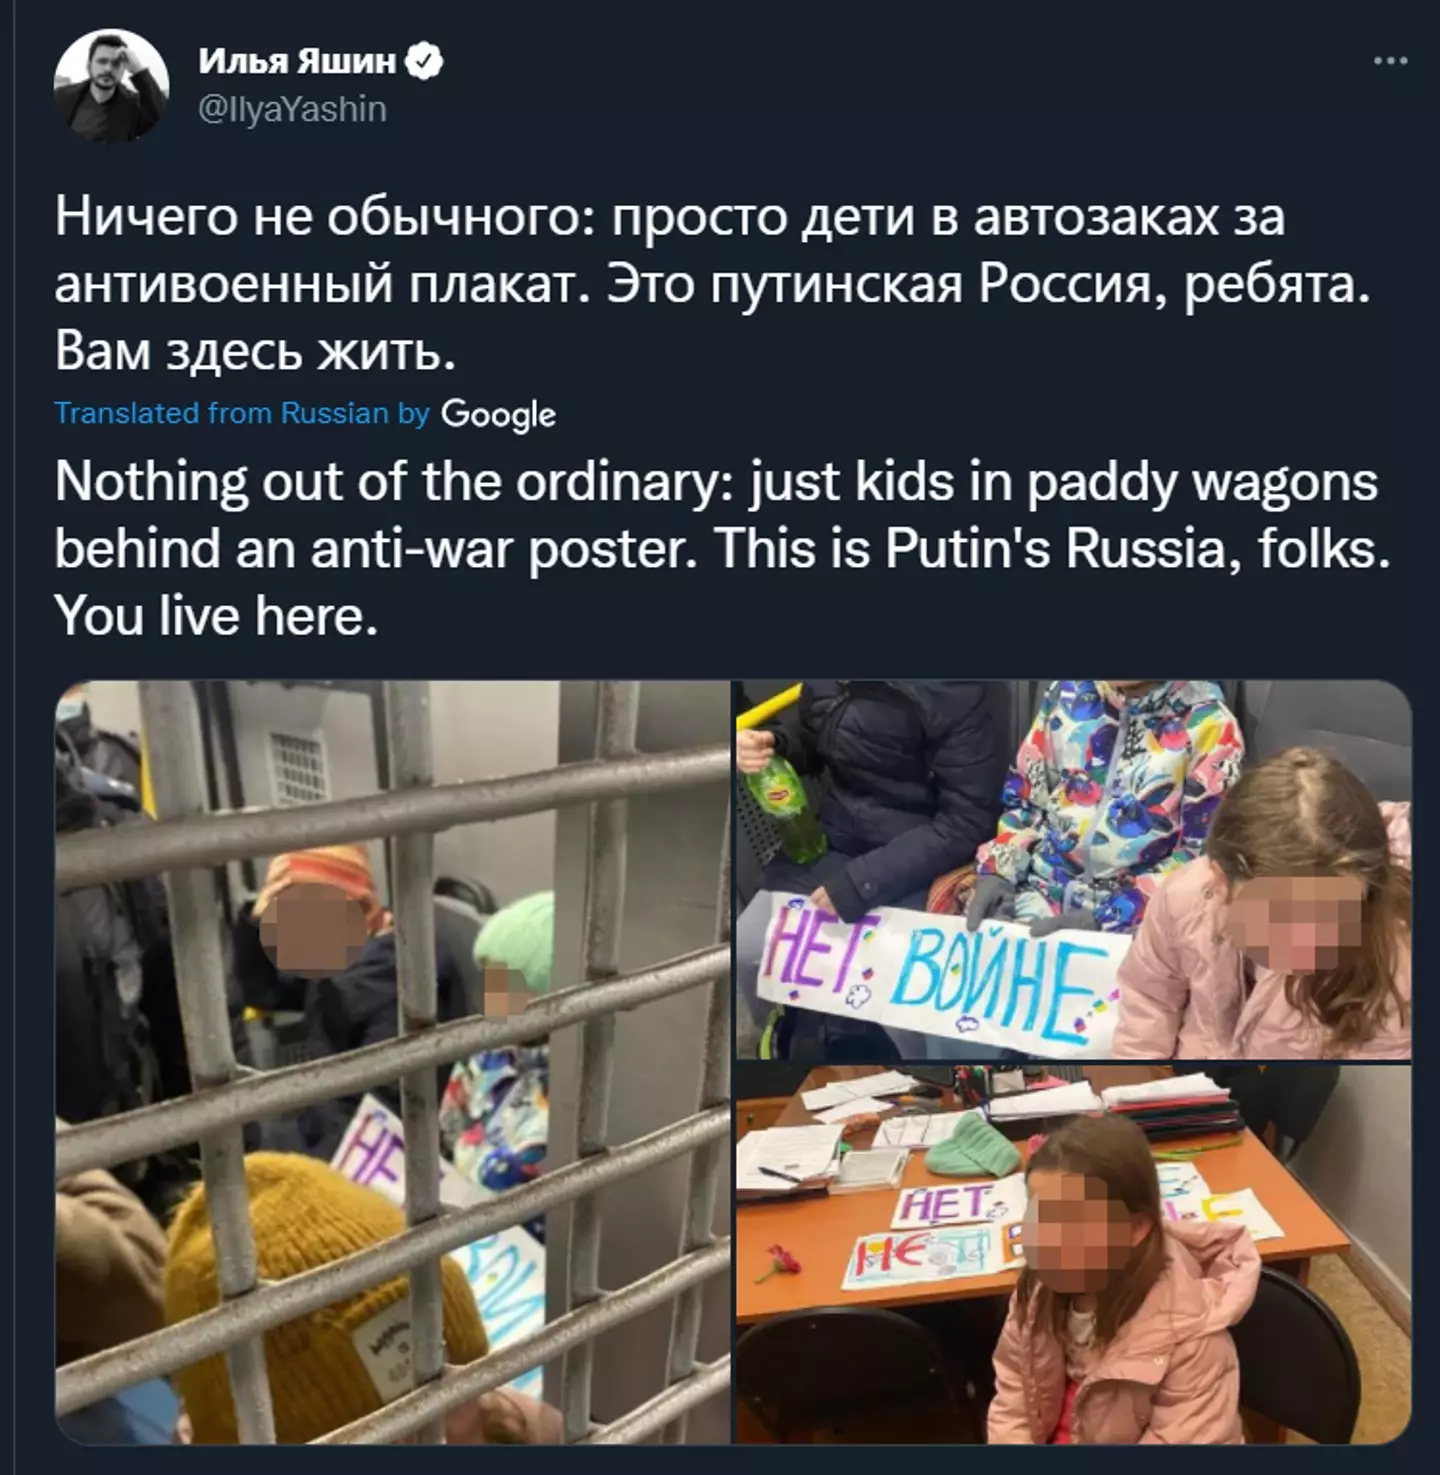 Russian politician claims children detained for protesting invasion of Ukraine (@IlyaYashin/Twitter)